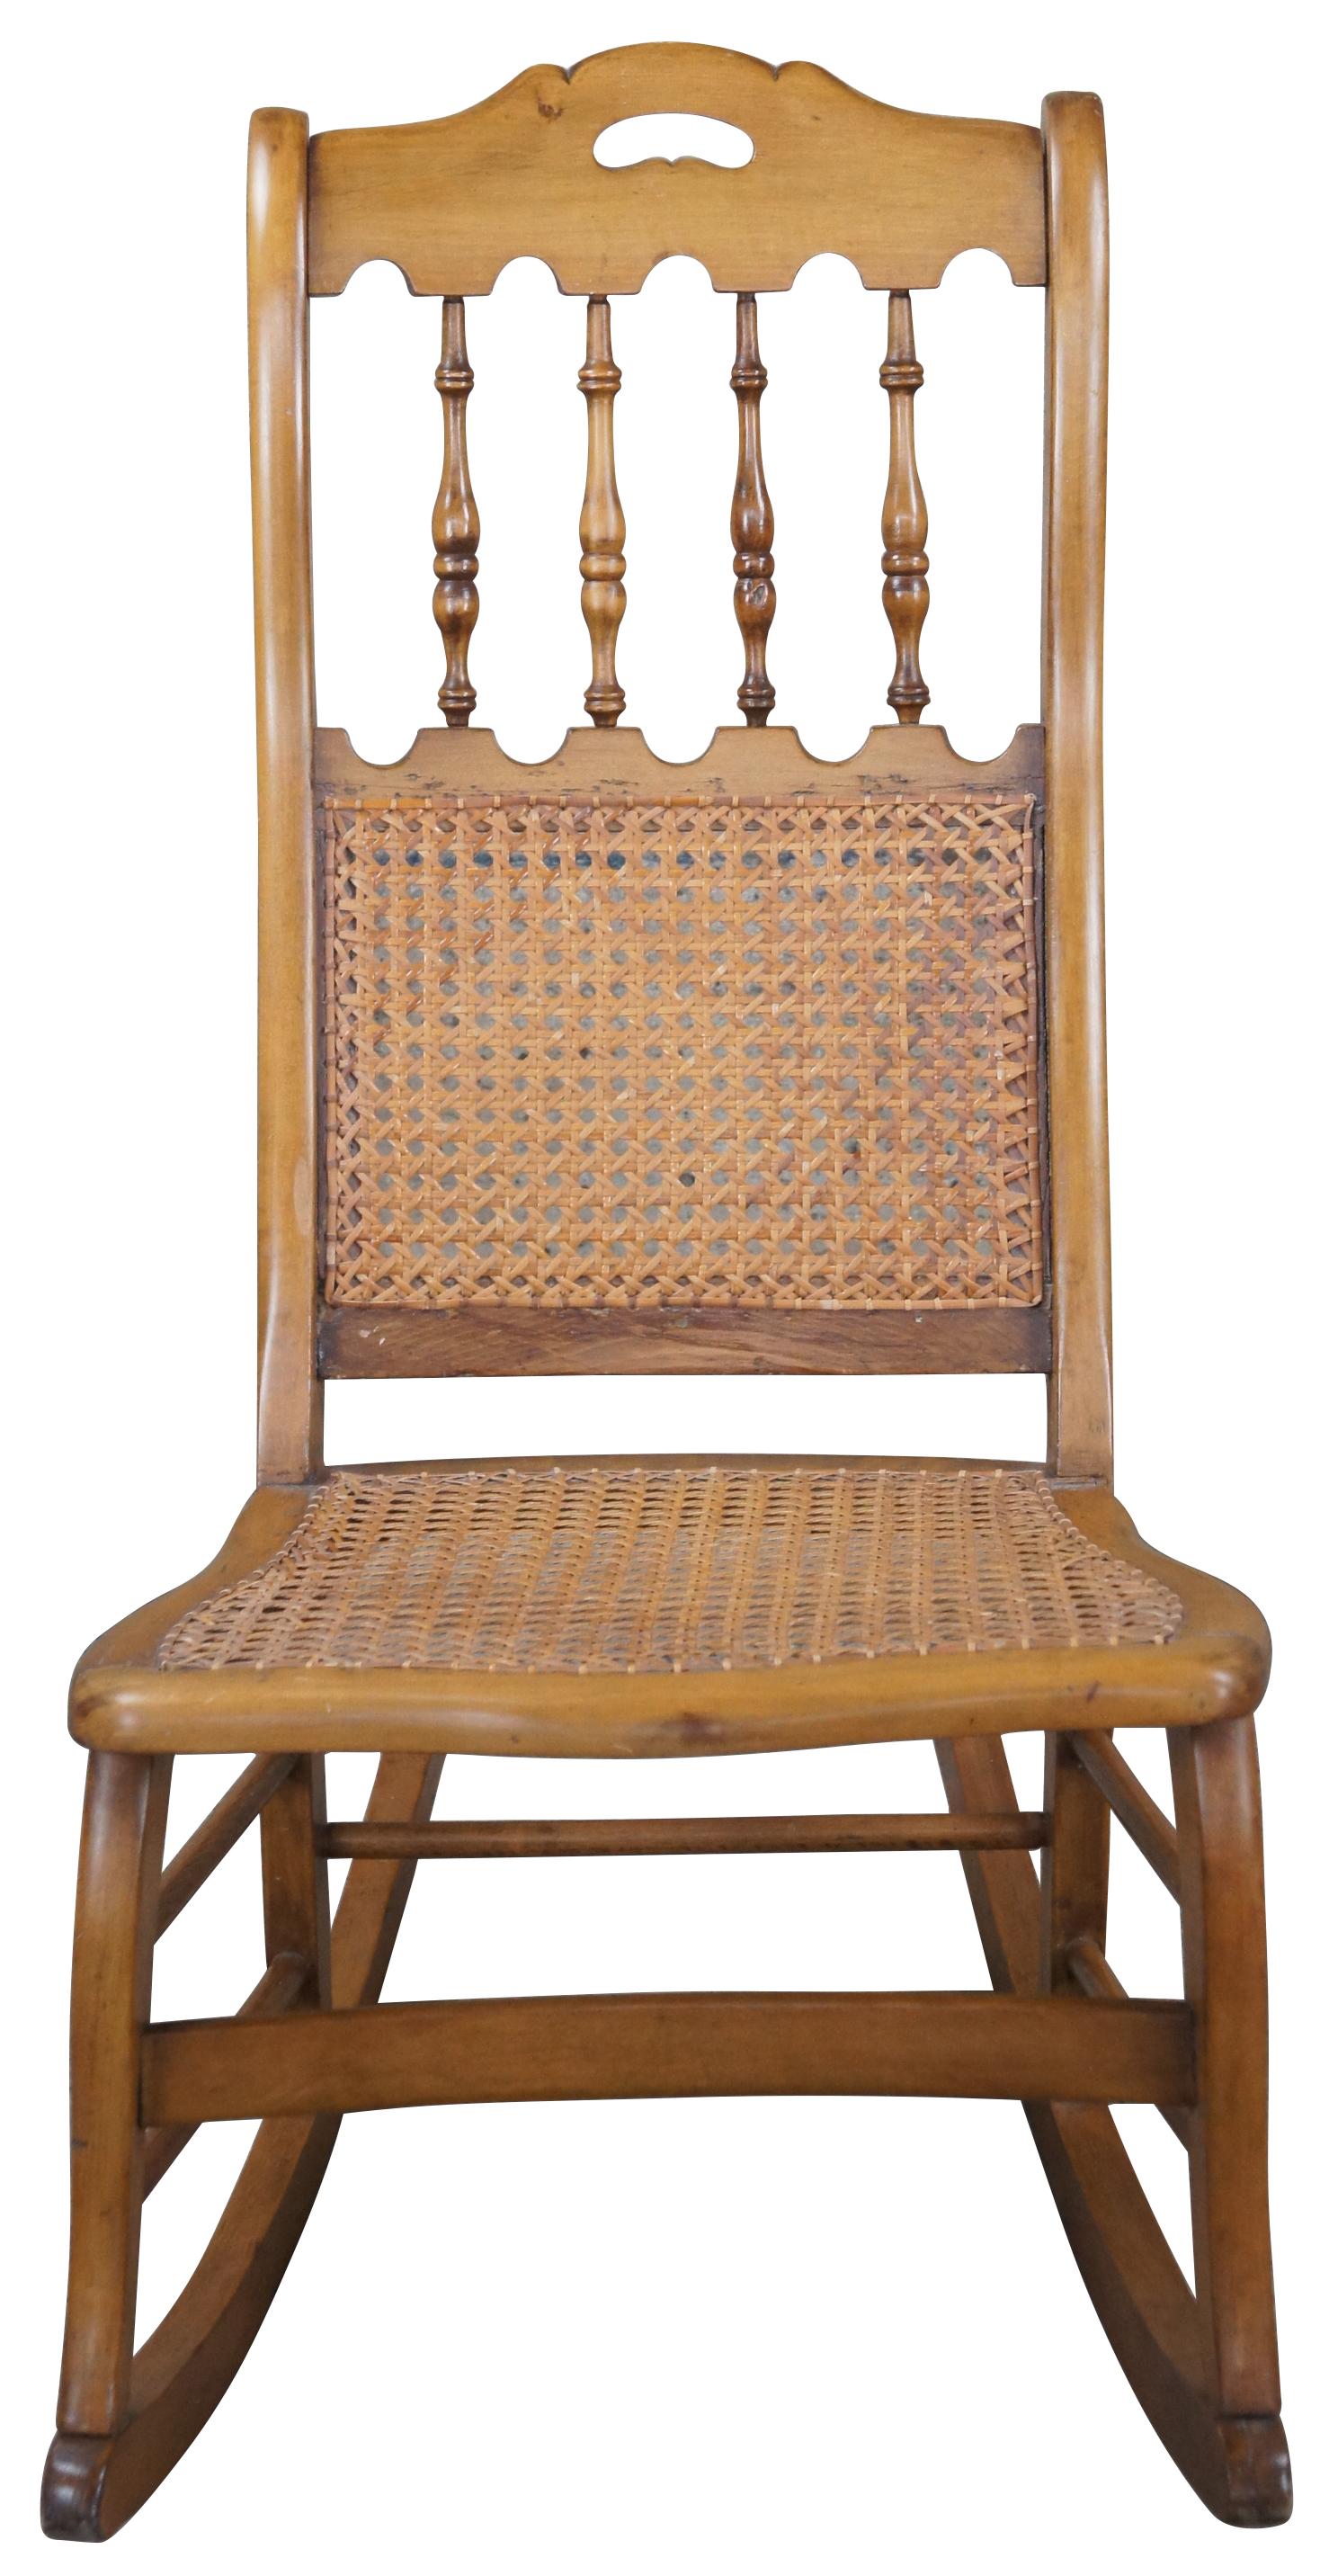 early american rocking chair